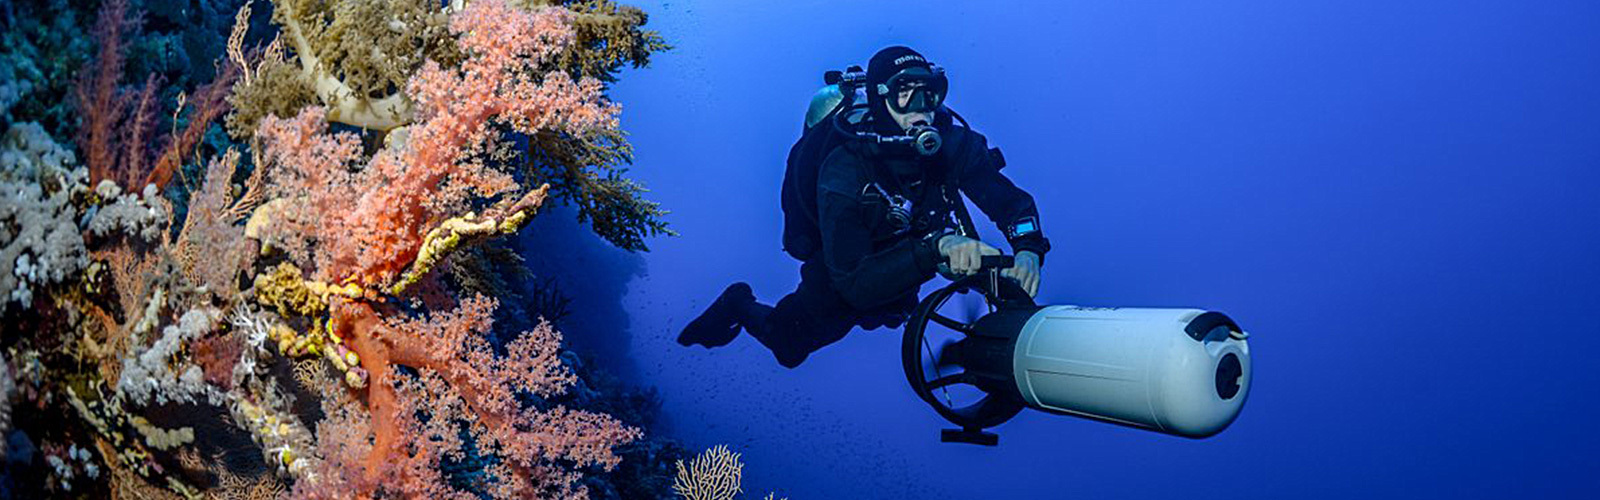 Diver with Scooter